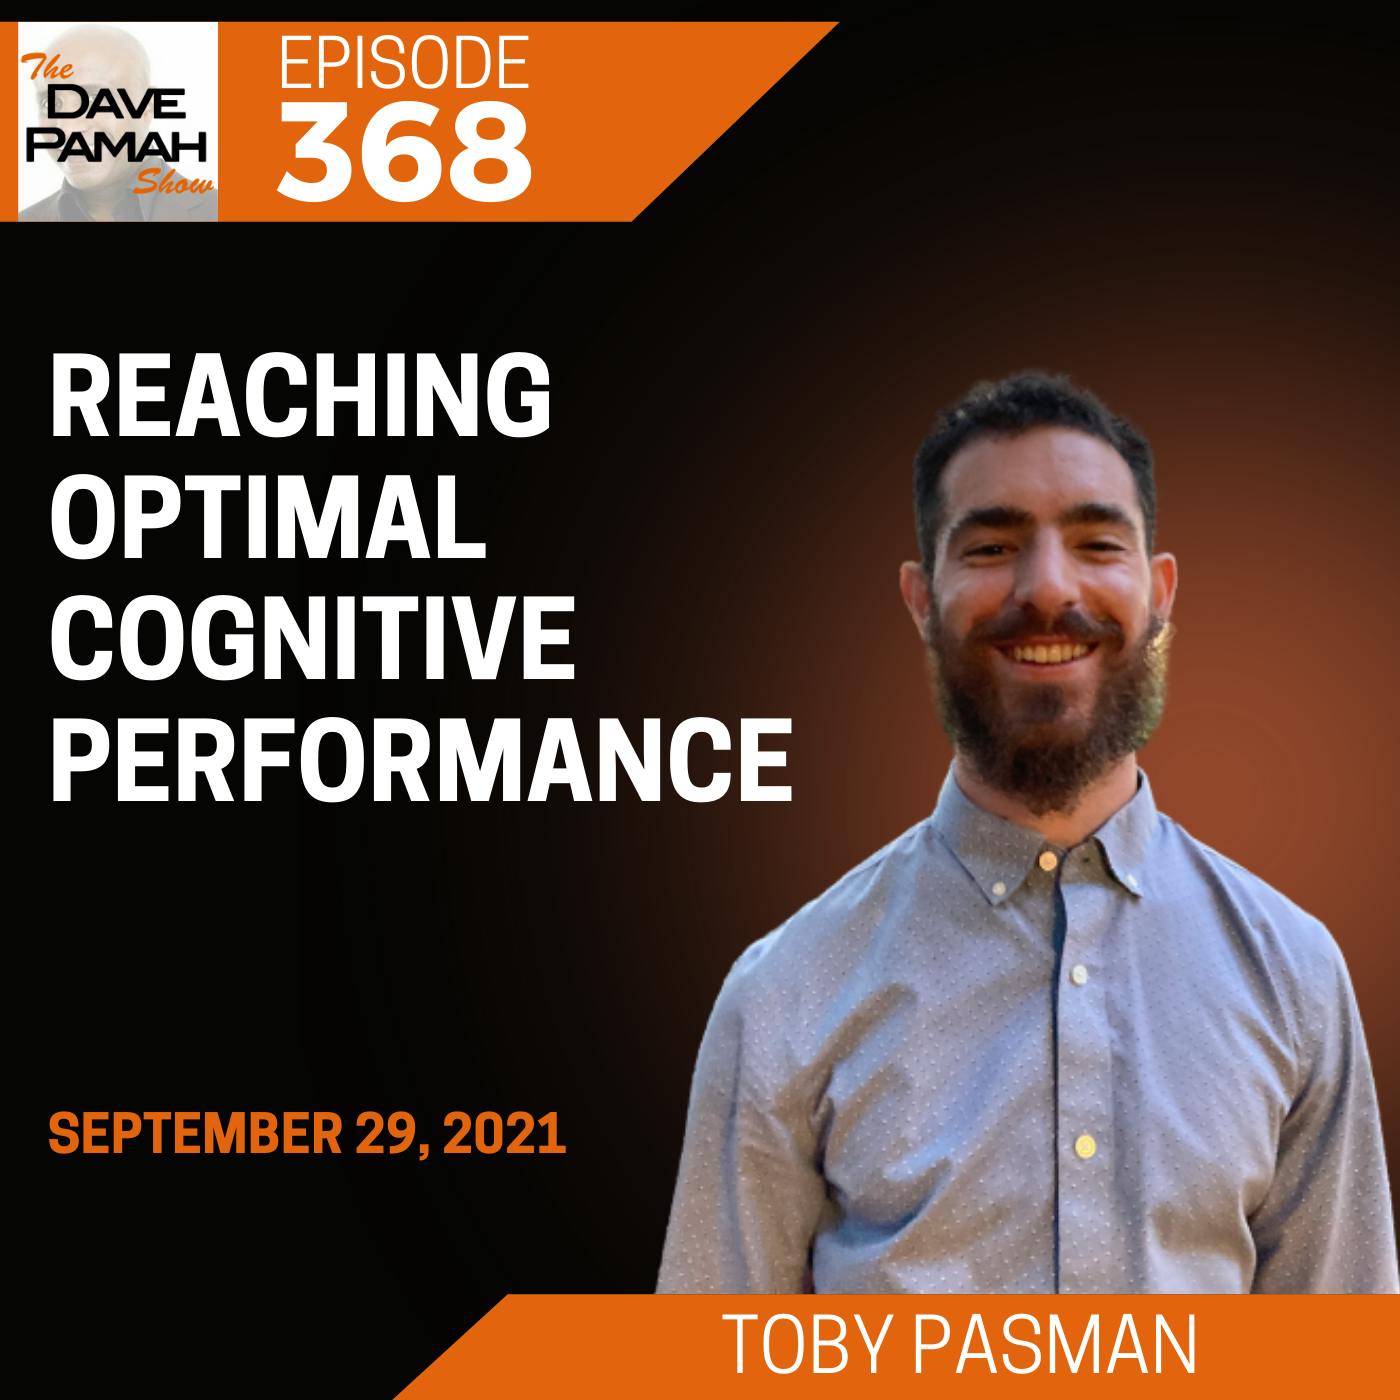 Reaching optimal cognitive performance with Toby Pasman Image